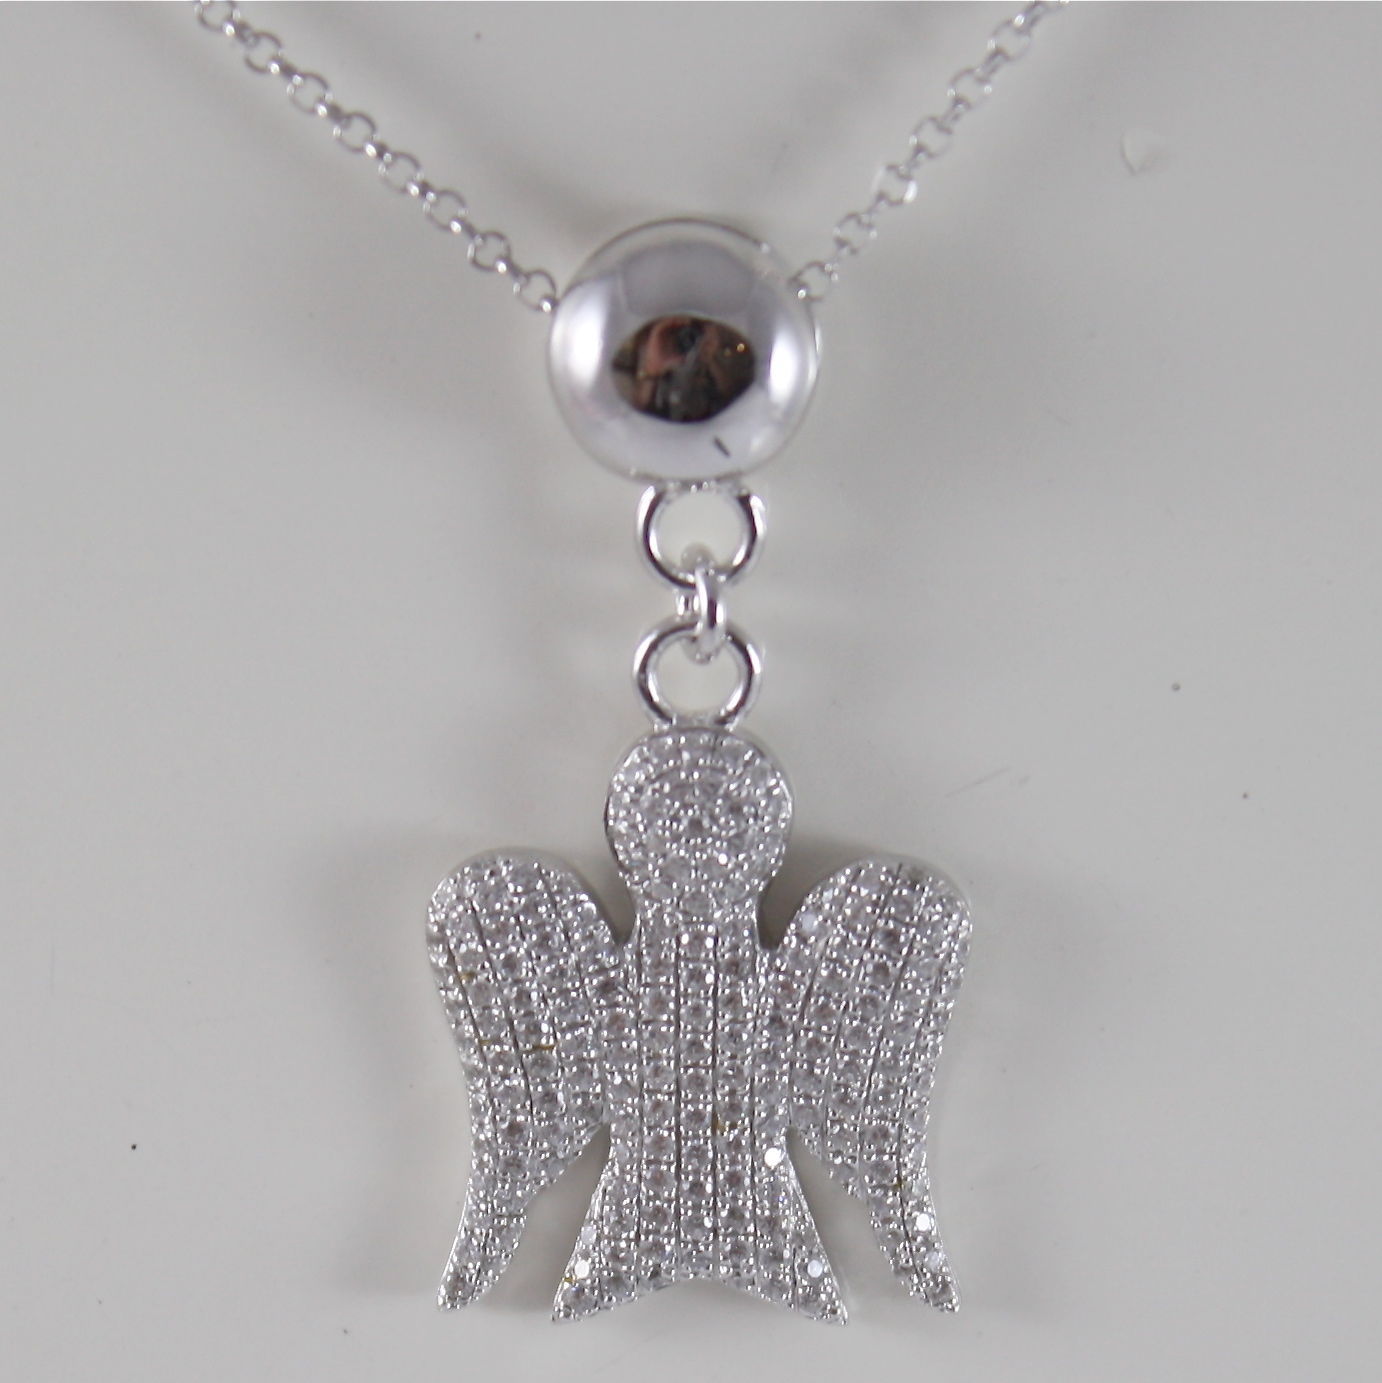 925 SILVER NECKLACE WITH ANGEL PENDANT GIA100 MADE IN ITALY BY ROBERTO GIANNOTTI - $143.82